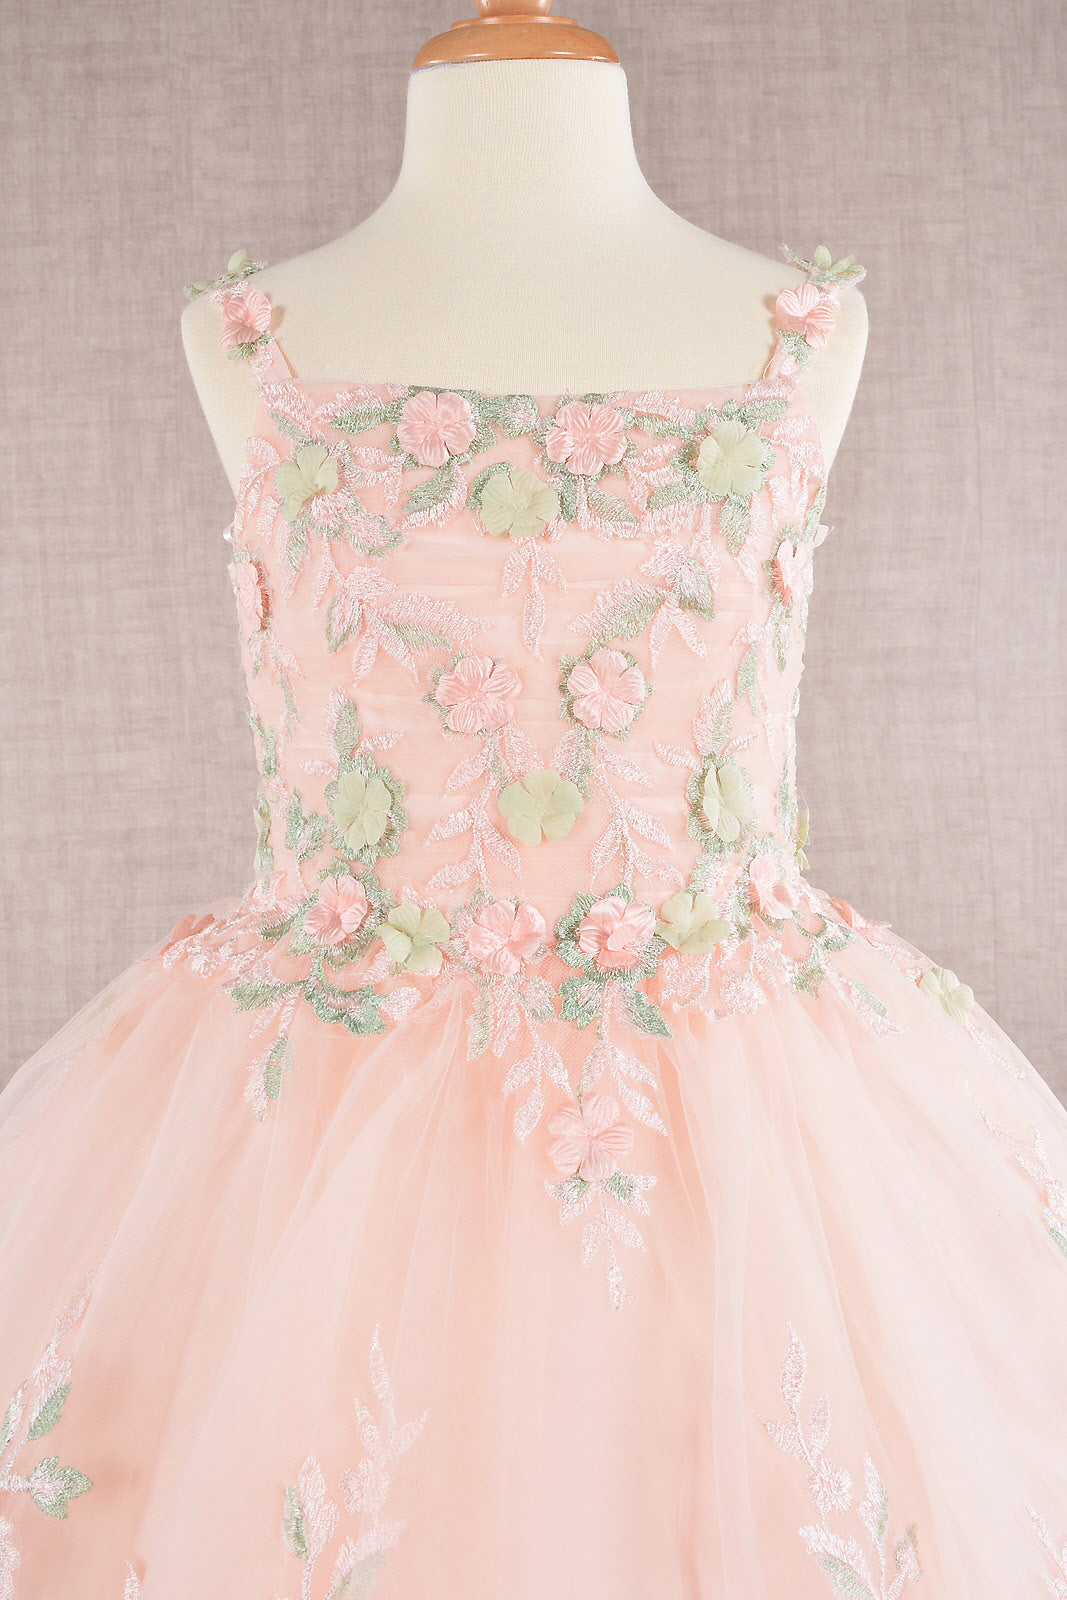 Floral Embroidery Embellished Ruched Bodice Mesh with Lace-up Back Quinceanera Kids Dress GLGK109-KIDS-smcfashion.com